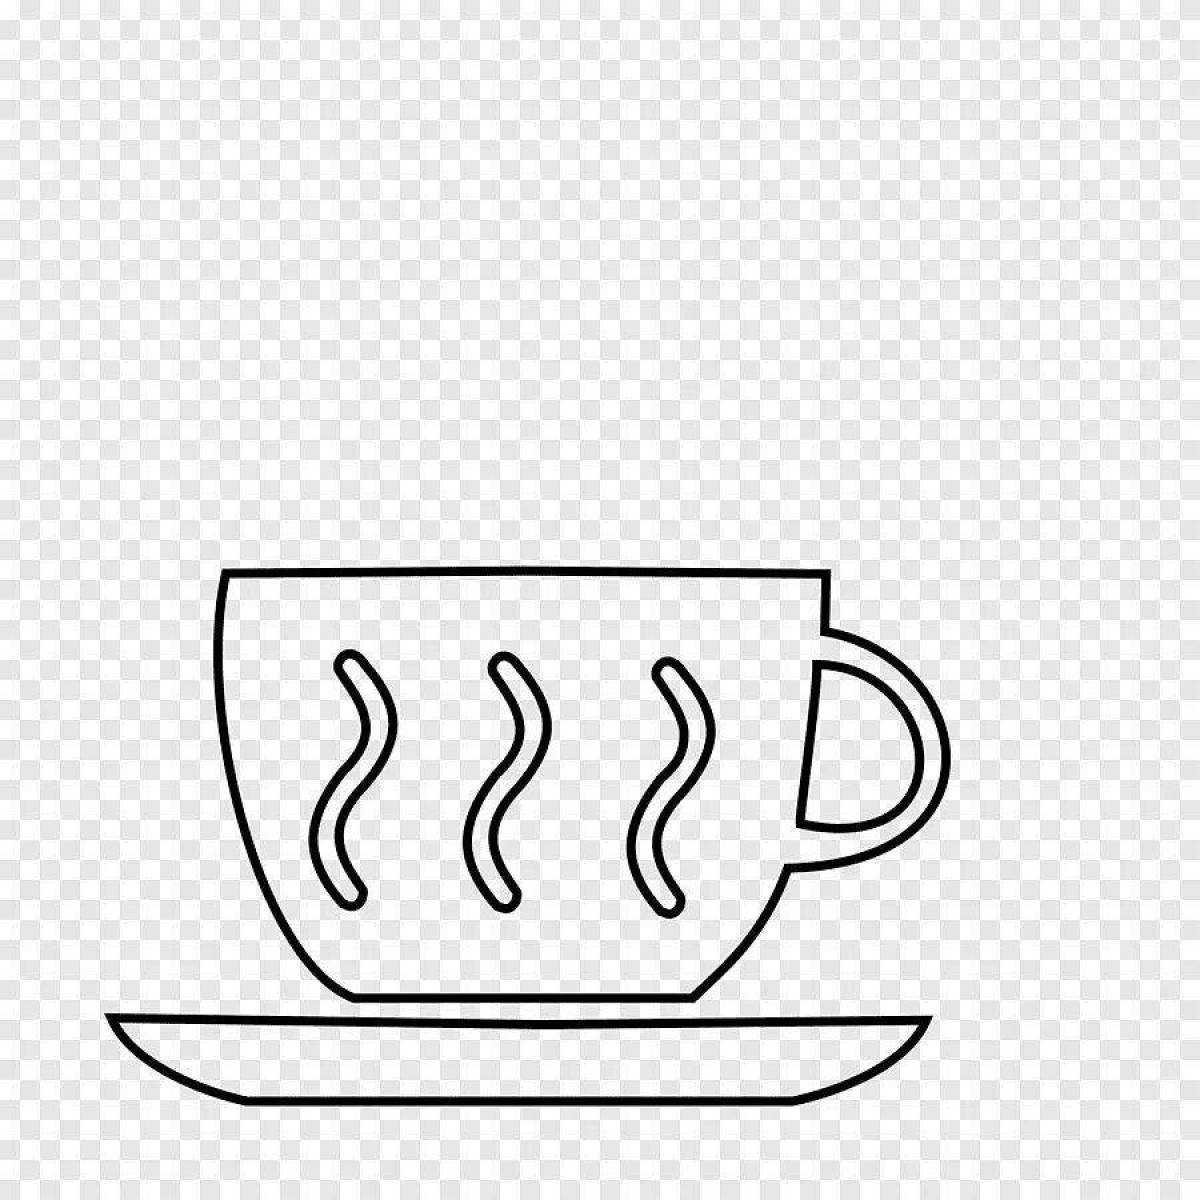 Coloring page with attractive cup pattern